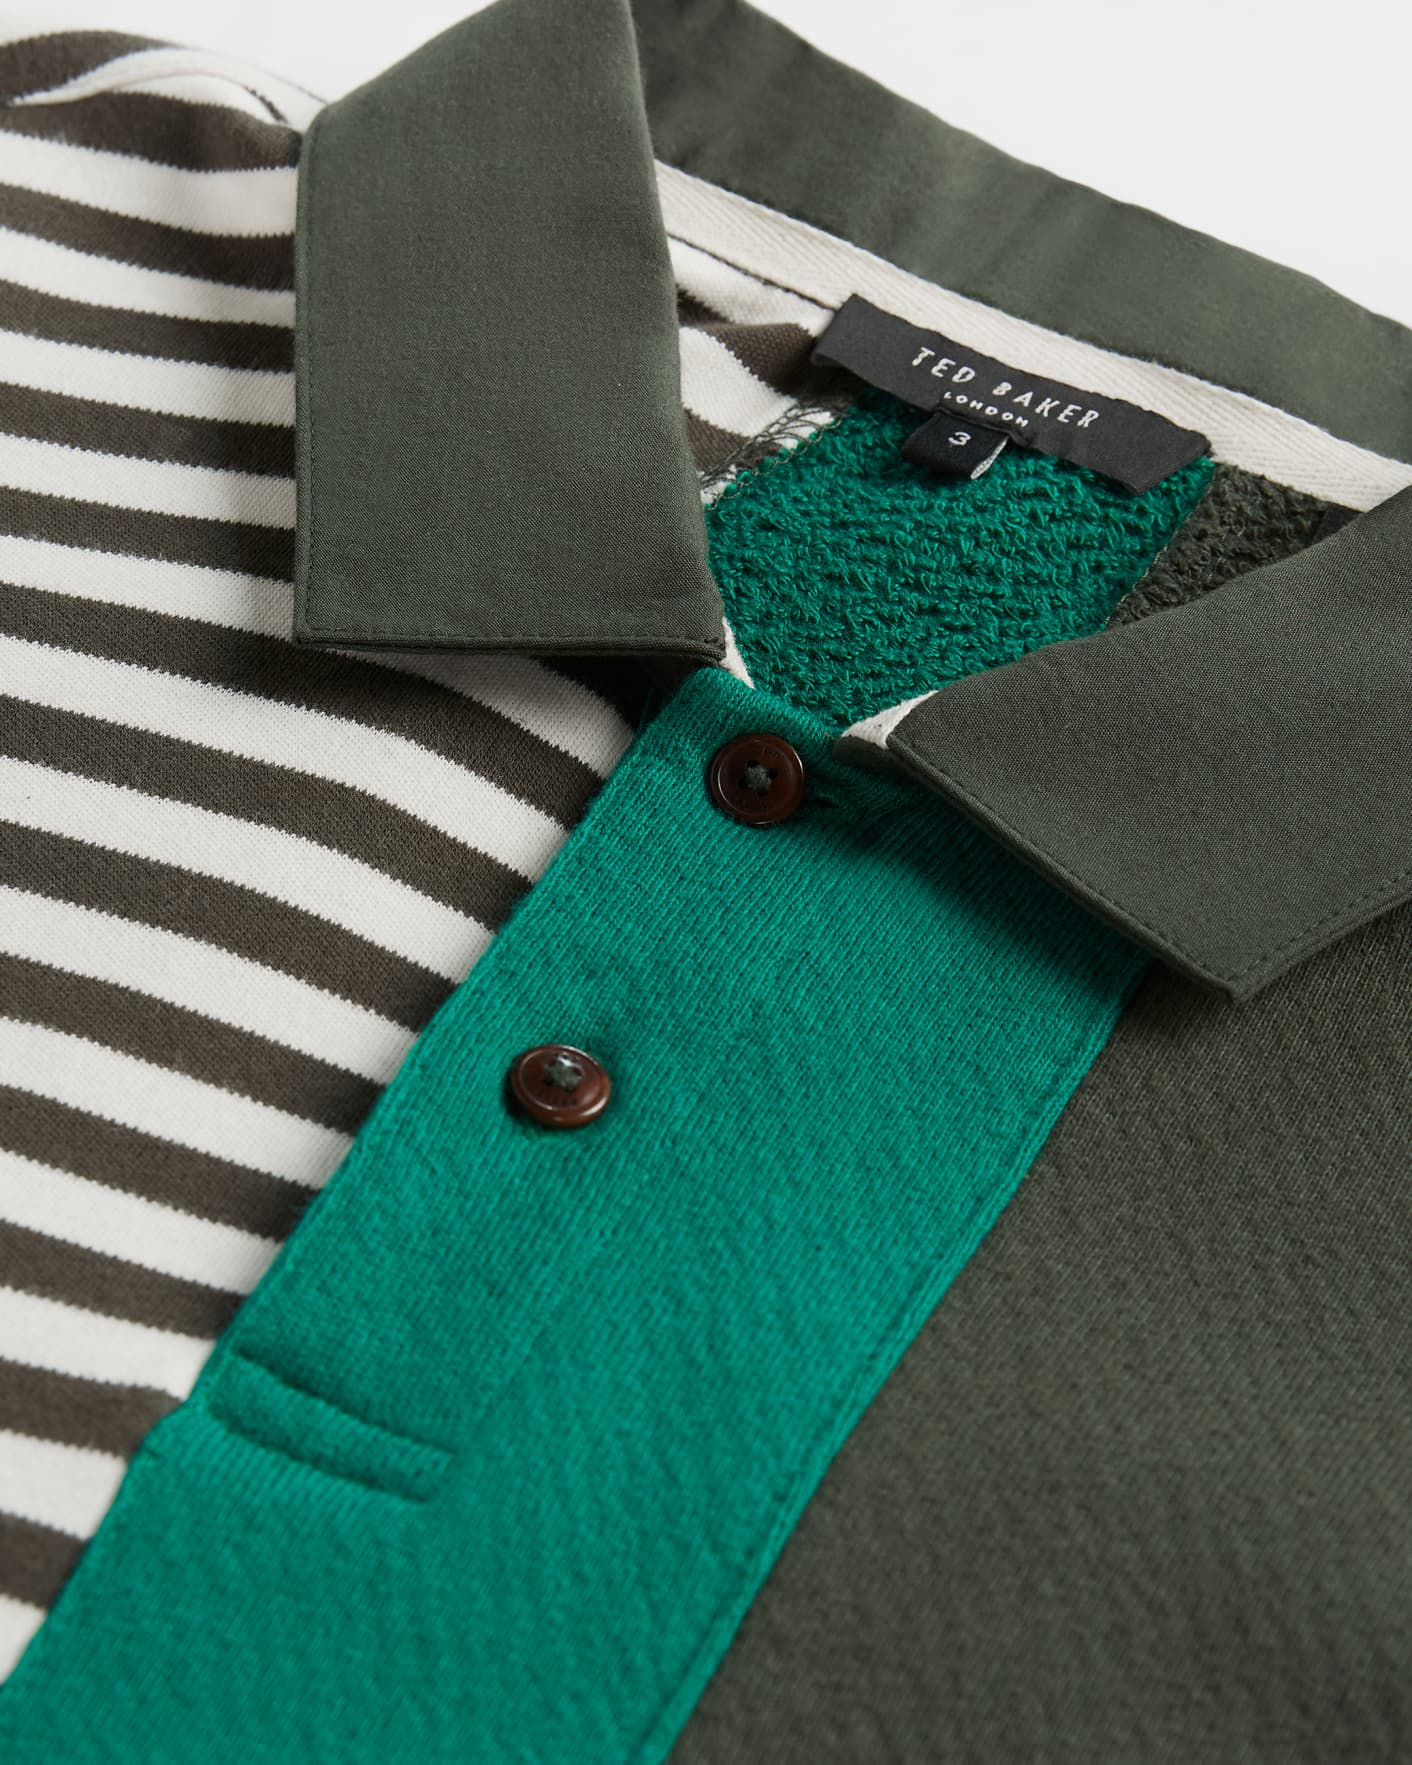 GREEN Ls Striped Rugby Top Ted Baker